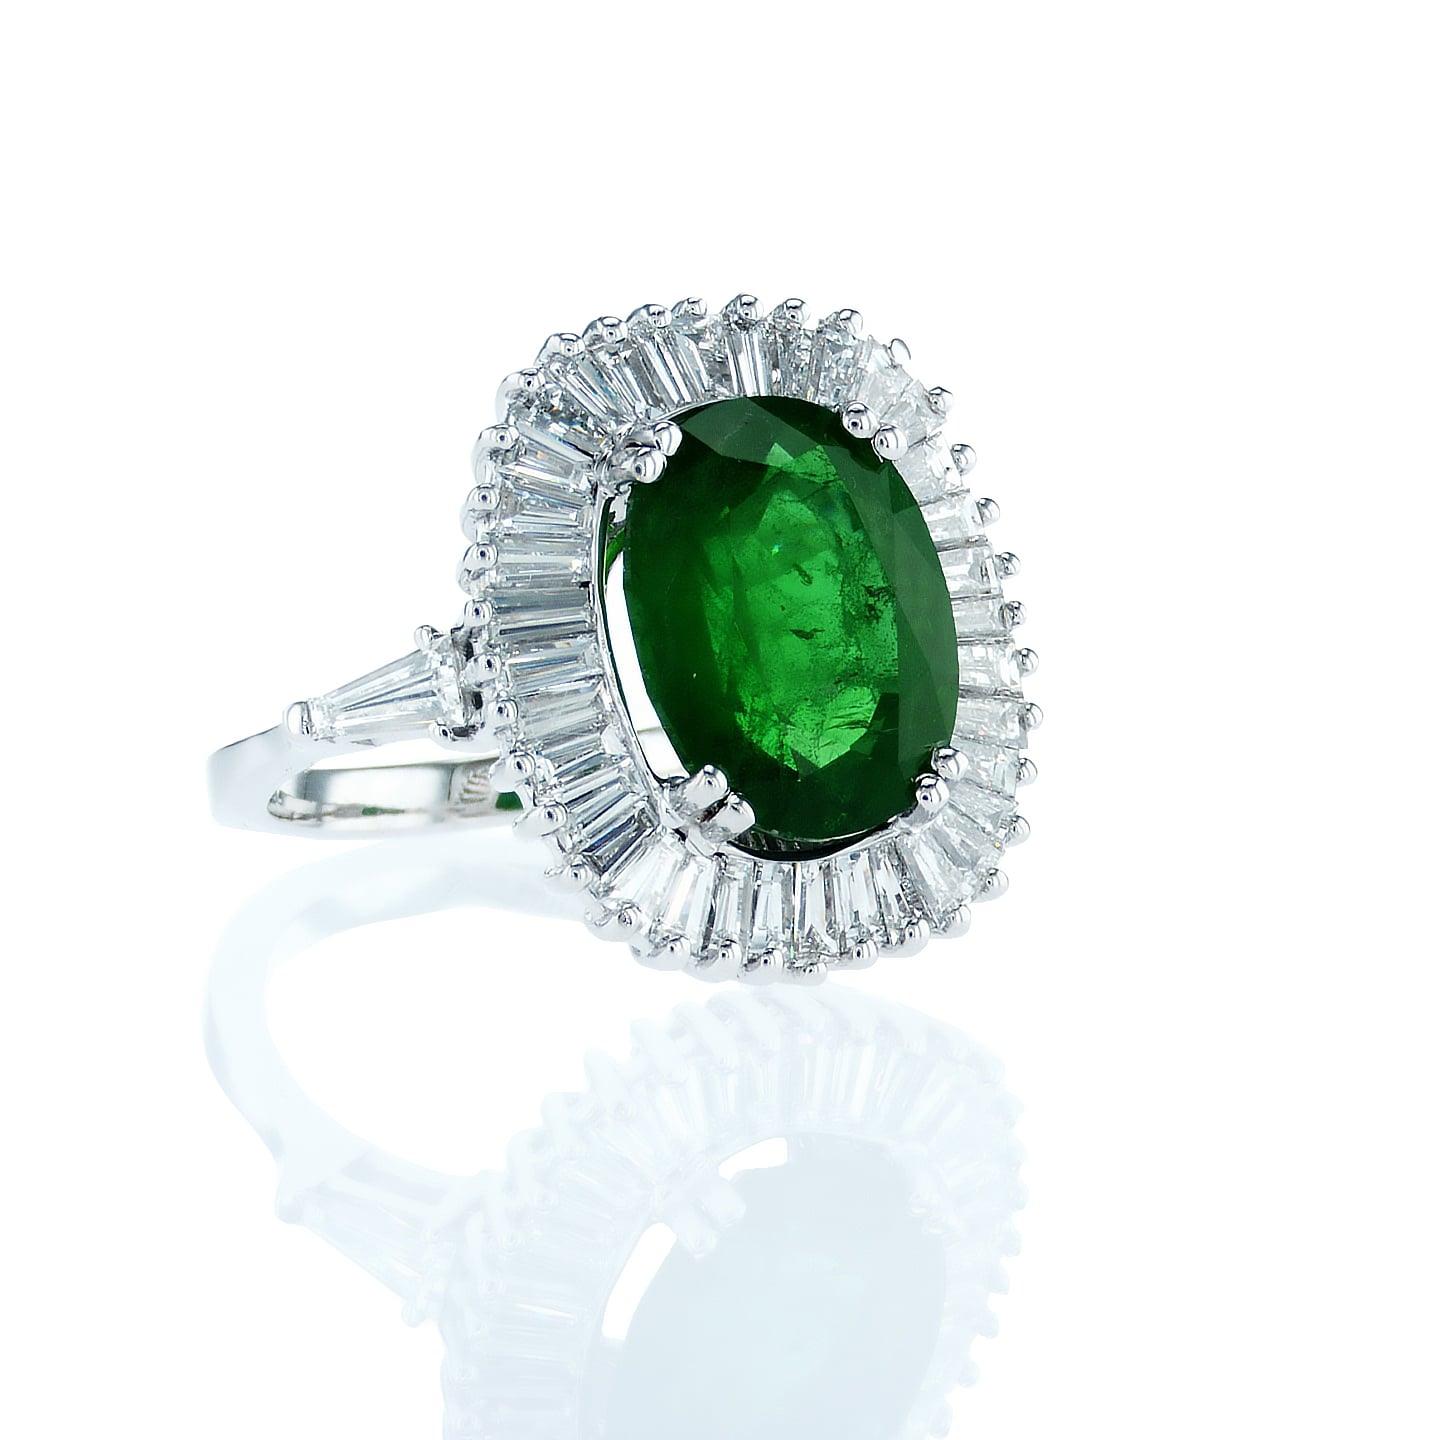 
Hand Crafted Ballerina Style ring featuring an oval 4.32 Carat Natural Green Emerald as a center stone and accompanied by 38 high quality tapered baguette shaped diamonds 1.77 Carat TDW.  This magnificent ring is made with precise detailed